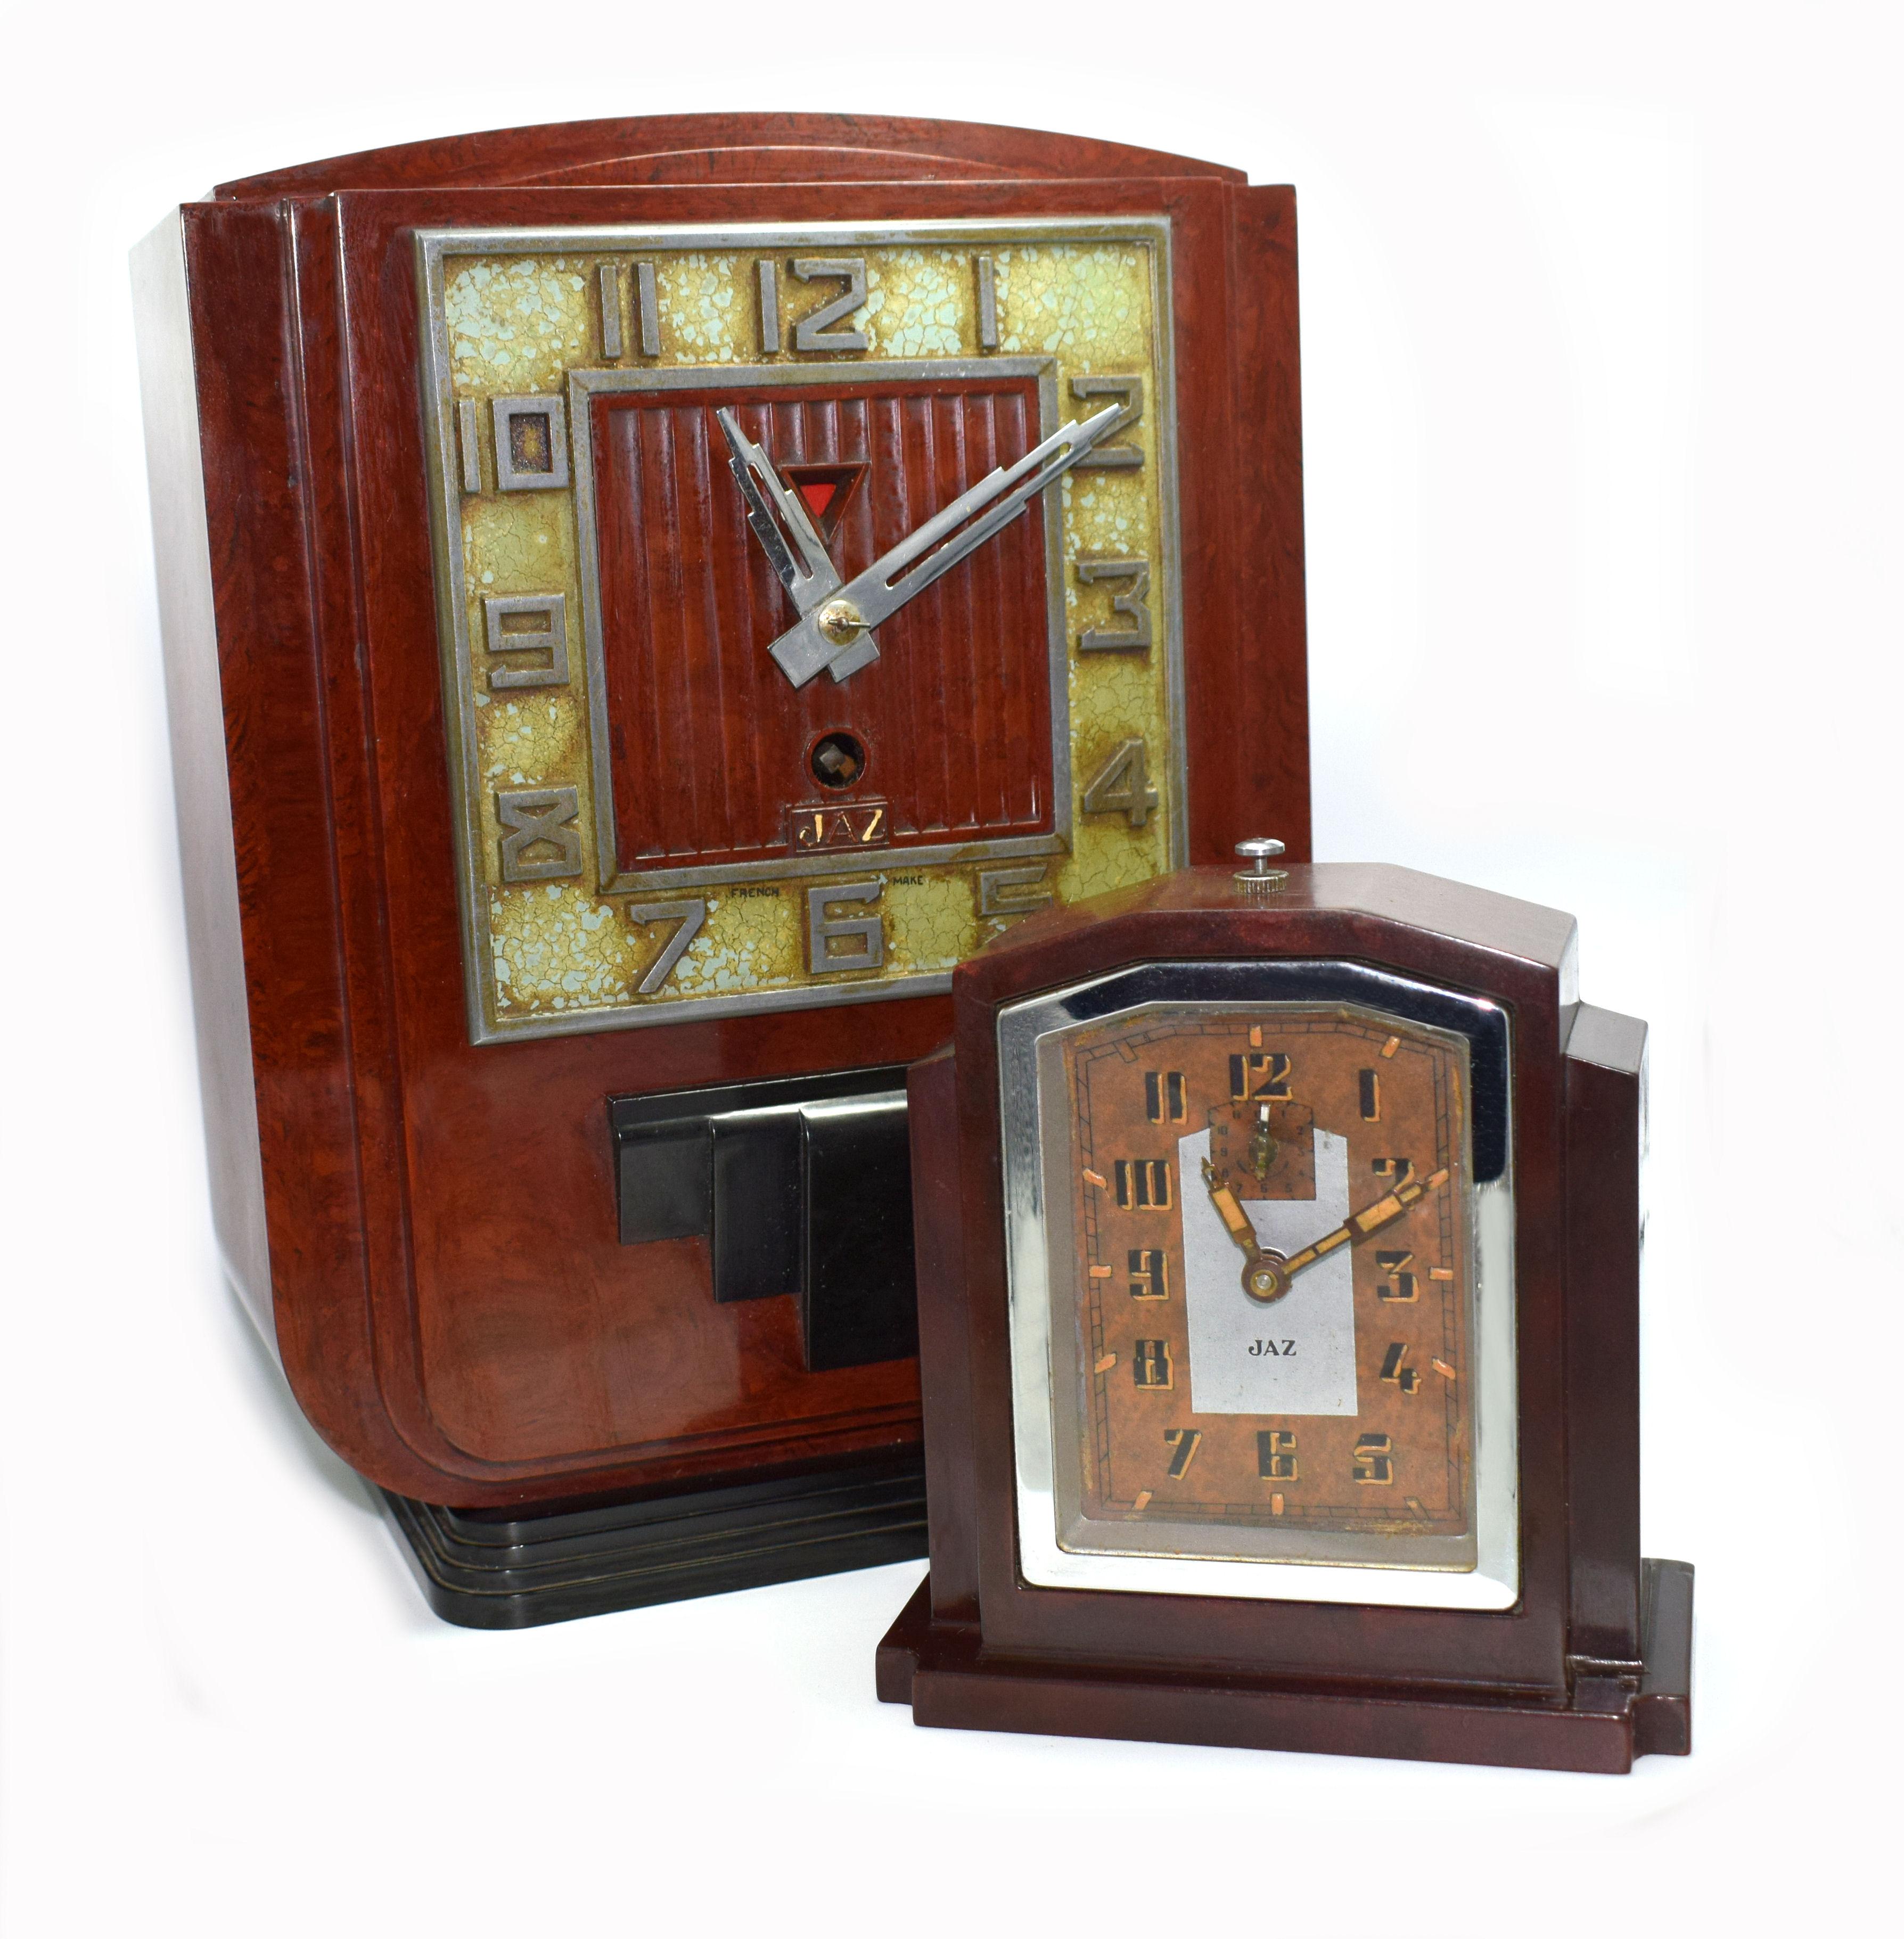 Large and Impressive 1930s Art Deco Red Bakelite Mantle Clock by JAZ In Good Condition For Sale In Devon, England